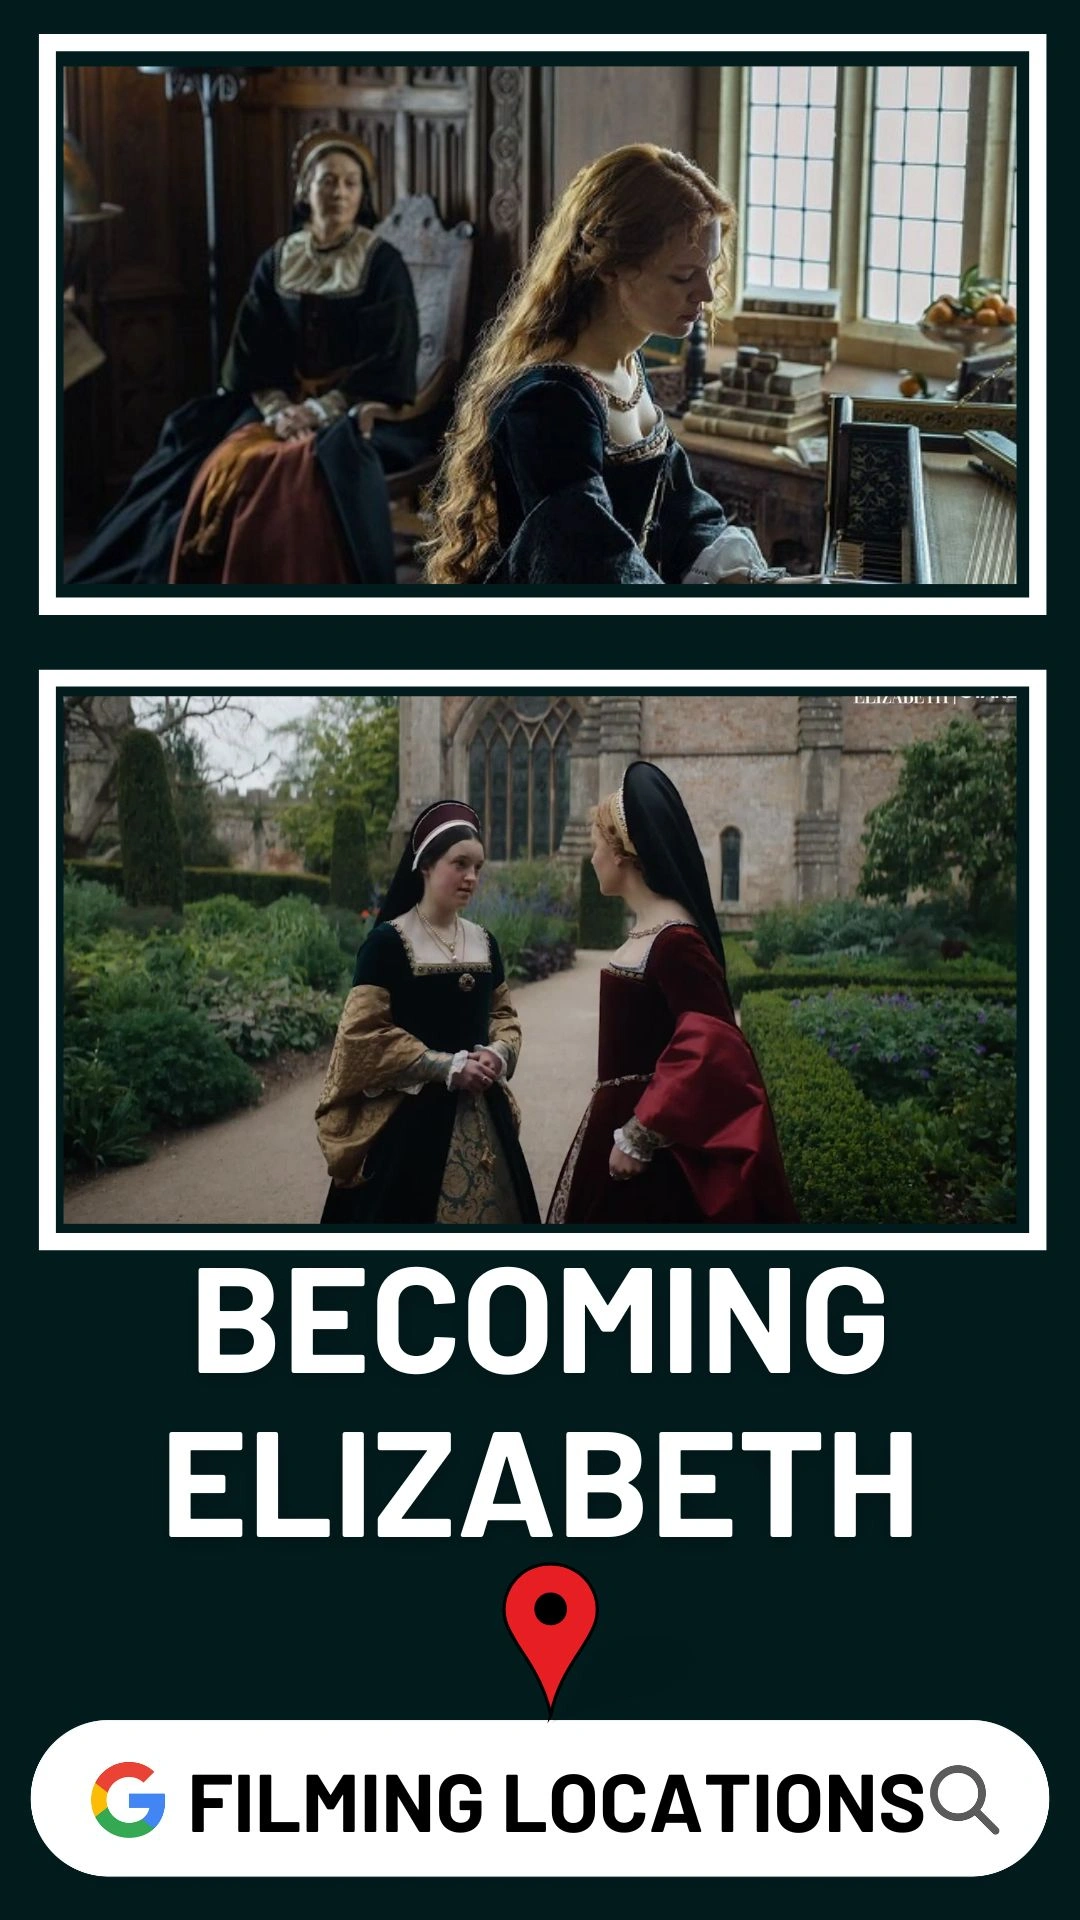 Becoming Elizabeth Filming Locations